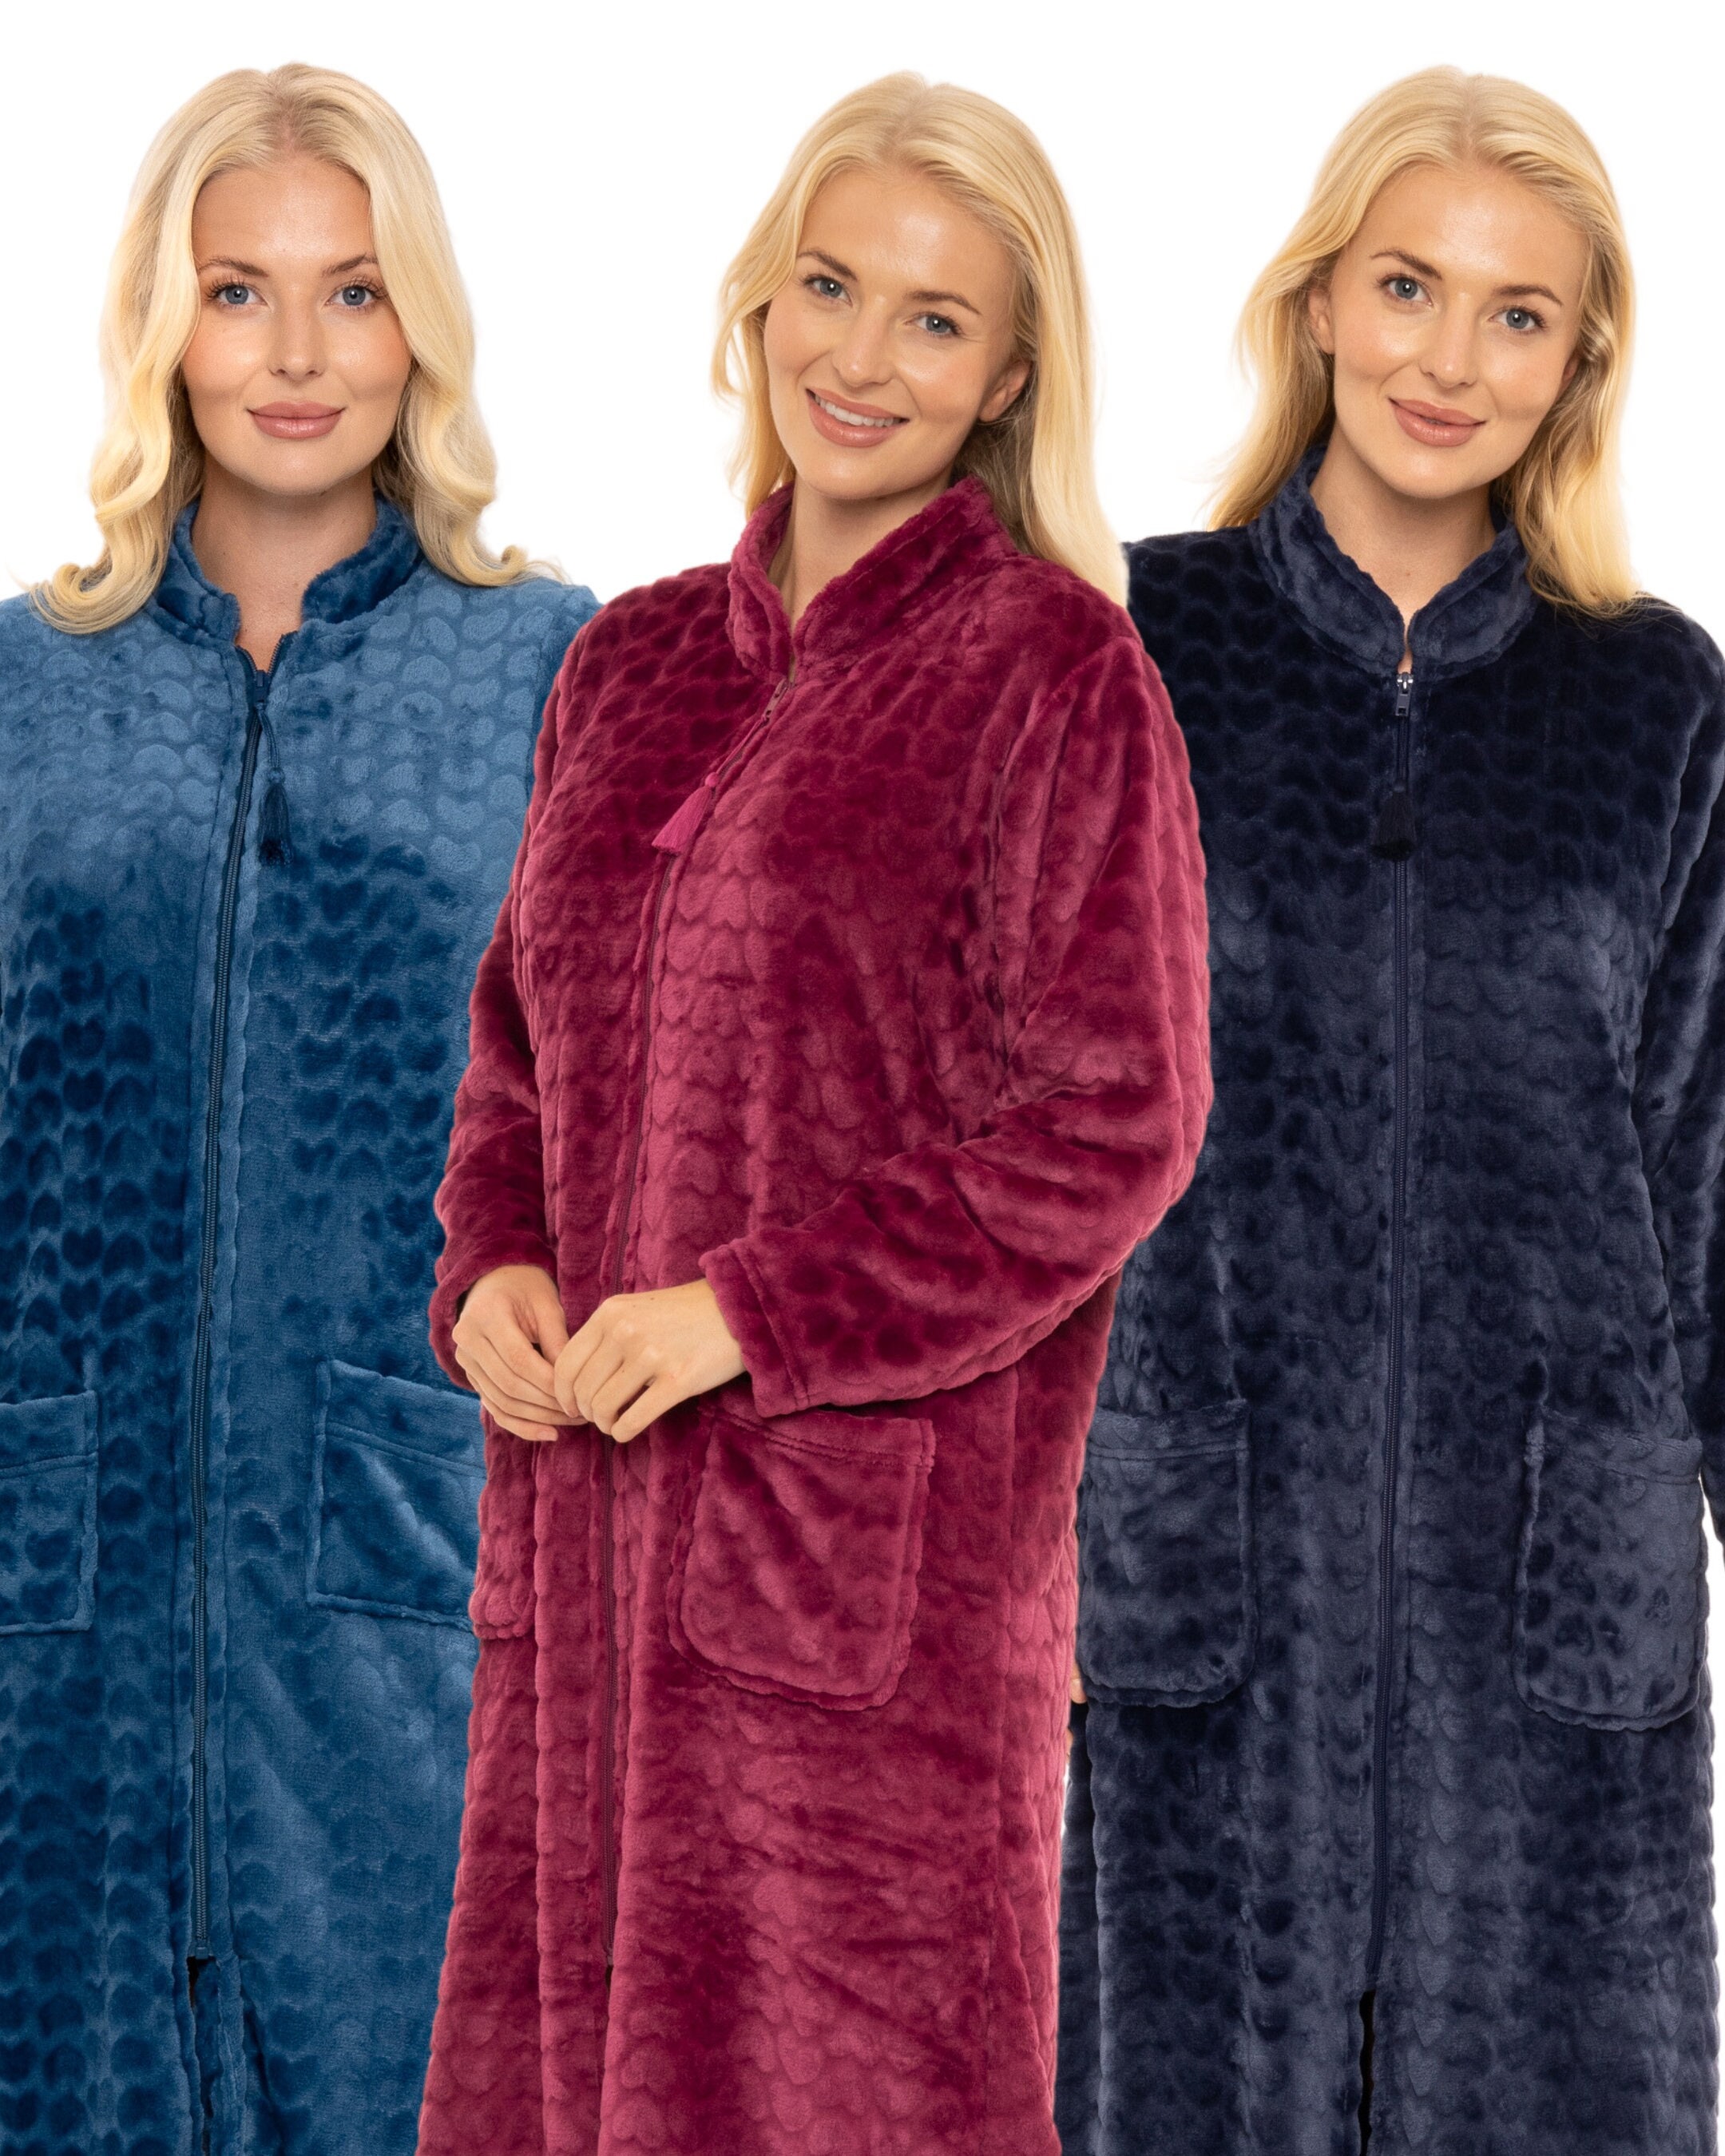 Tiljvks Womens Silk Robe and Nightgown Set Cute Night Wear for Women Night  Gowns for Adult Women Plus Size Sexy Nightgowns at Amazon Women's Clothing  store